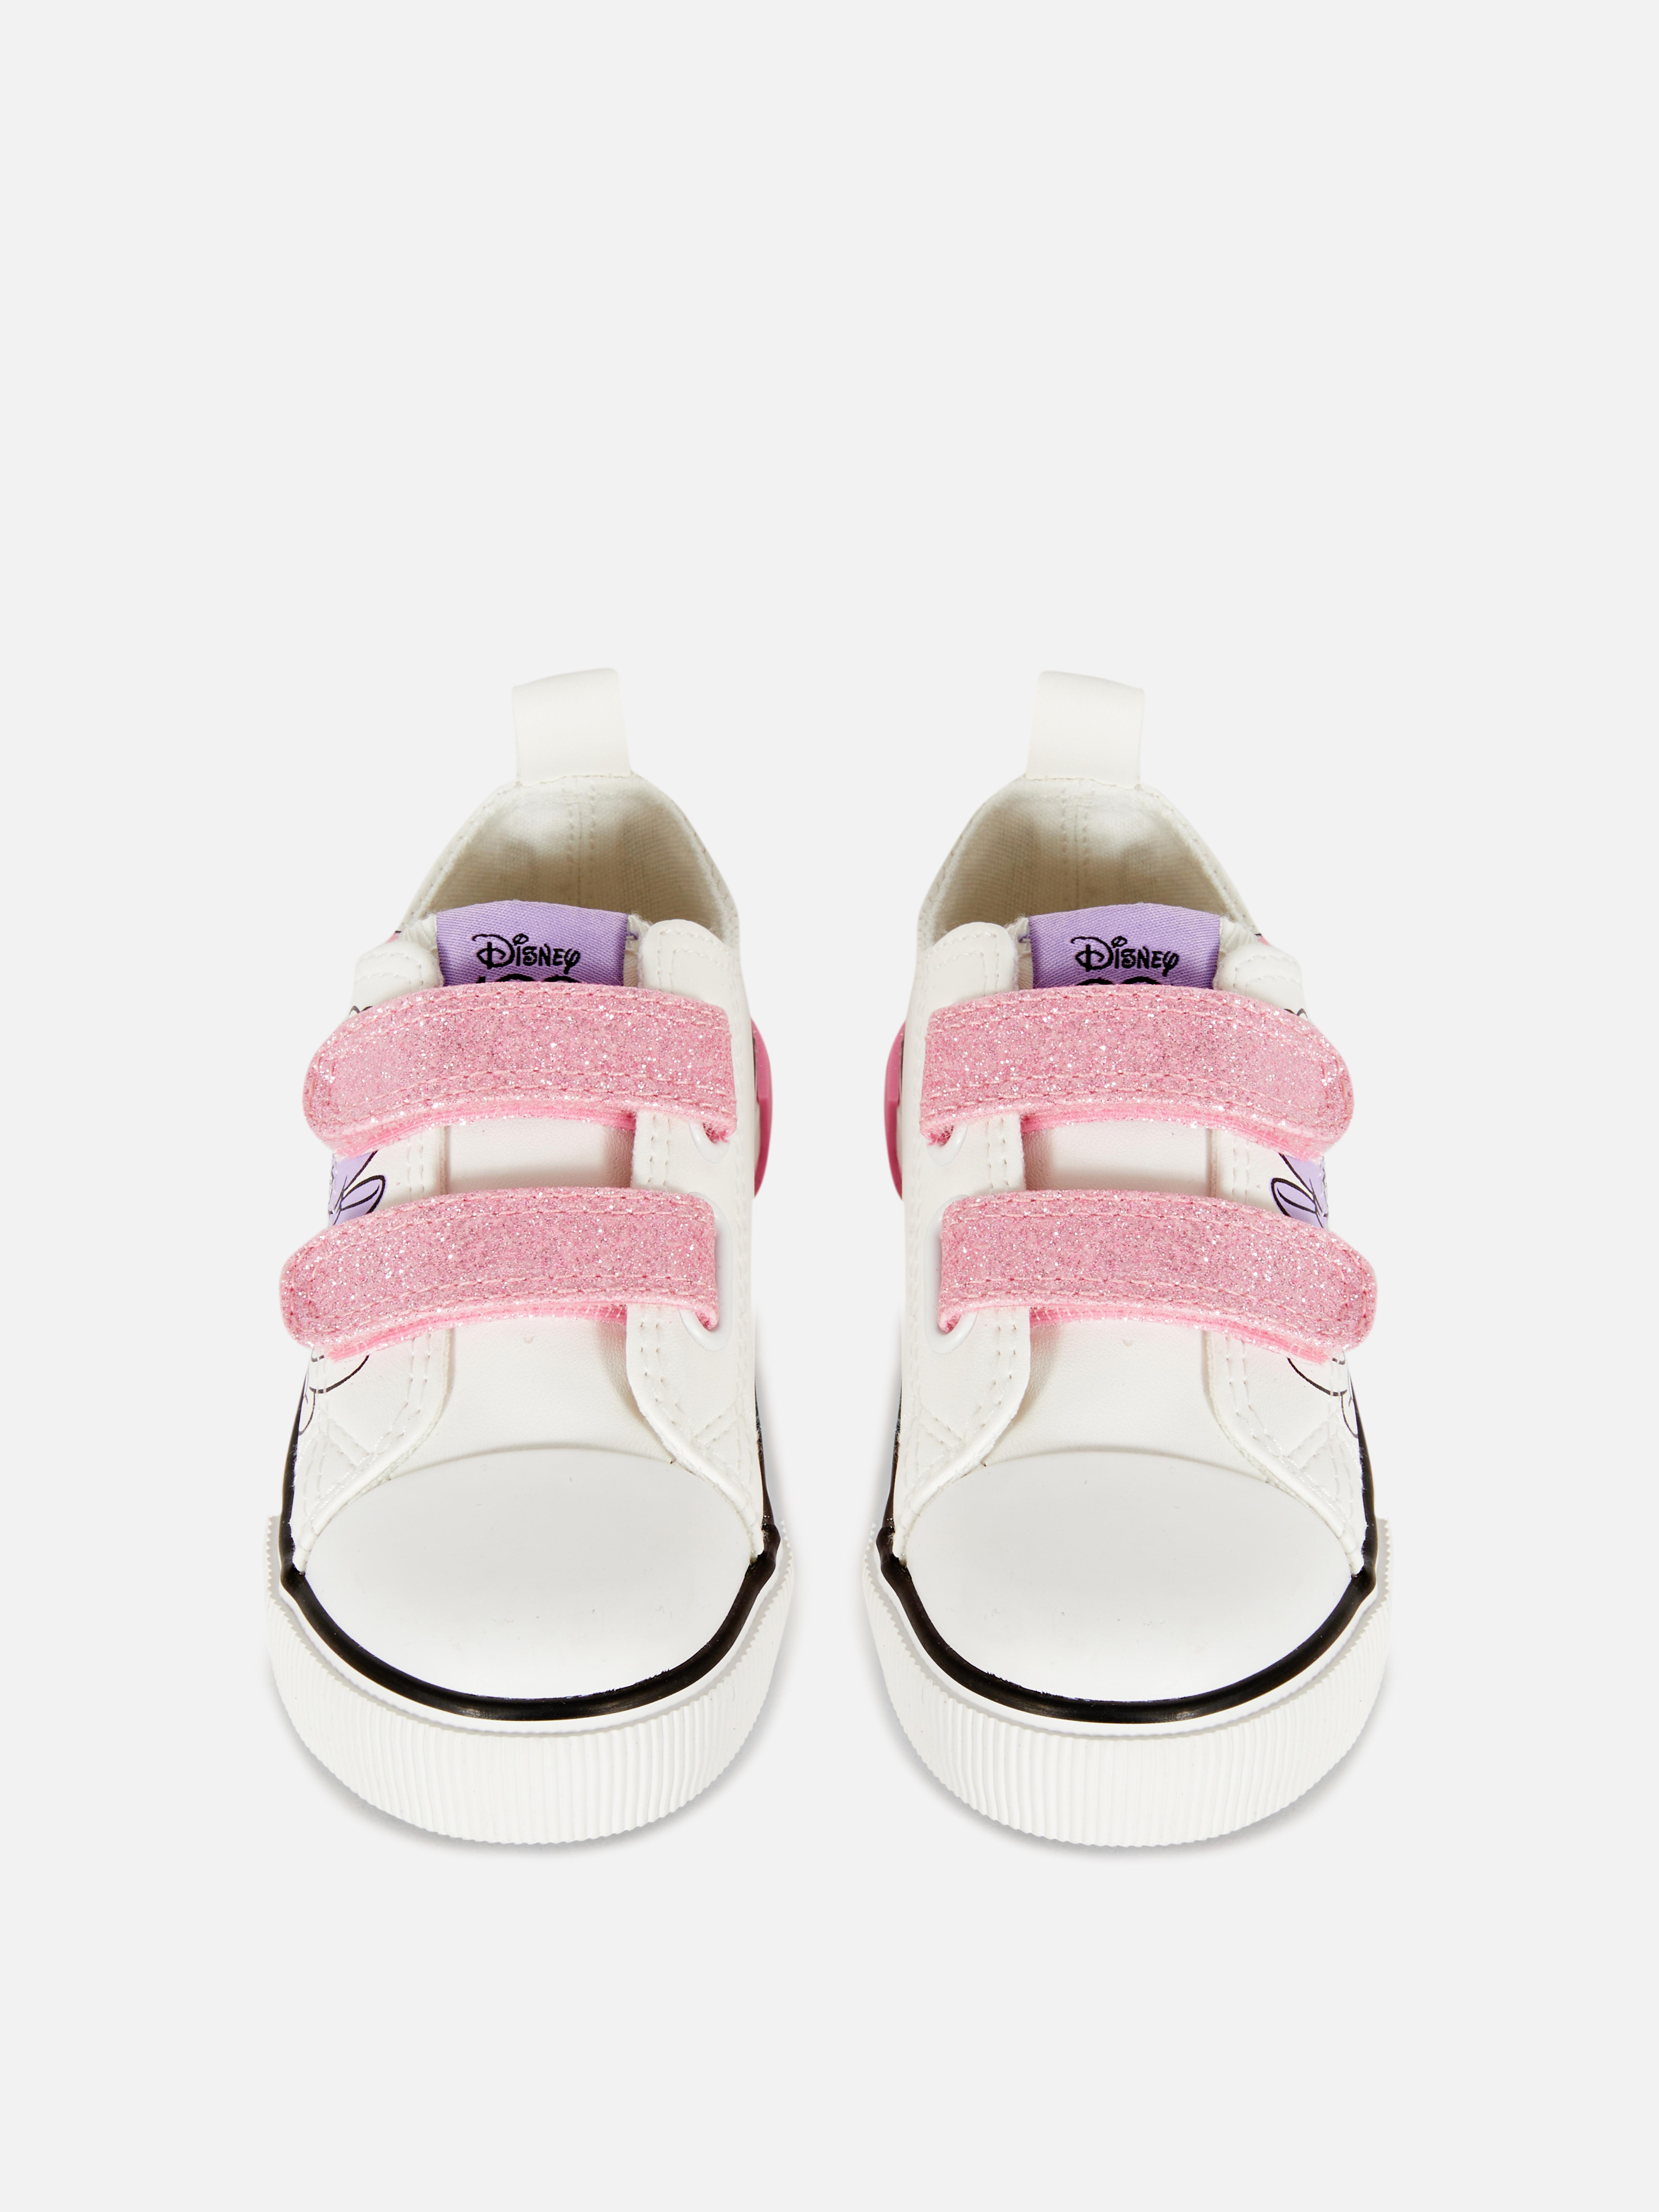 Disney's Minnie Mouse and Daisy Duck Double Strap Trainers